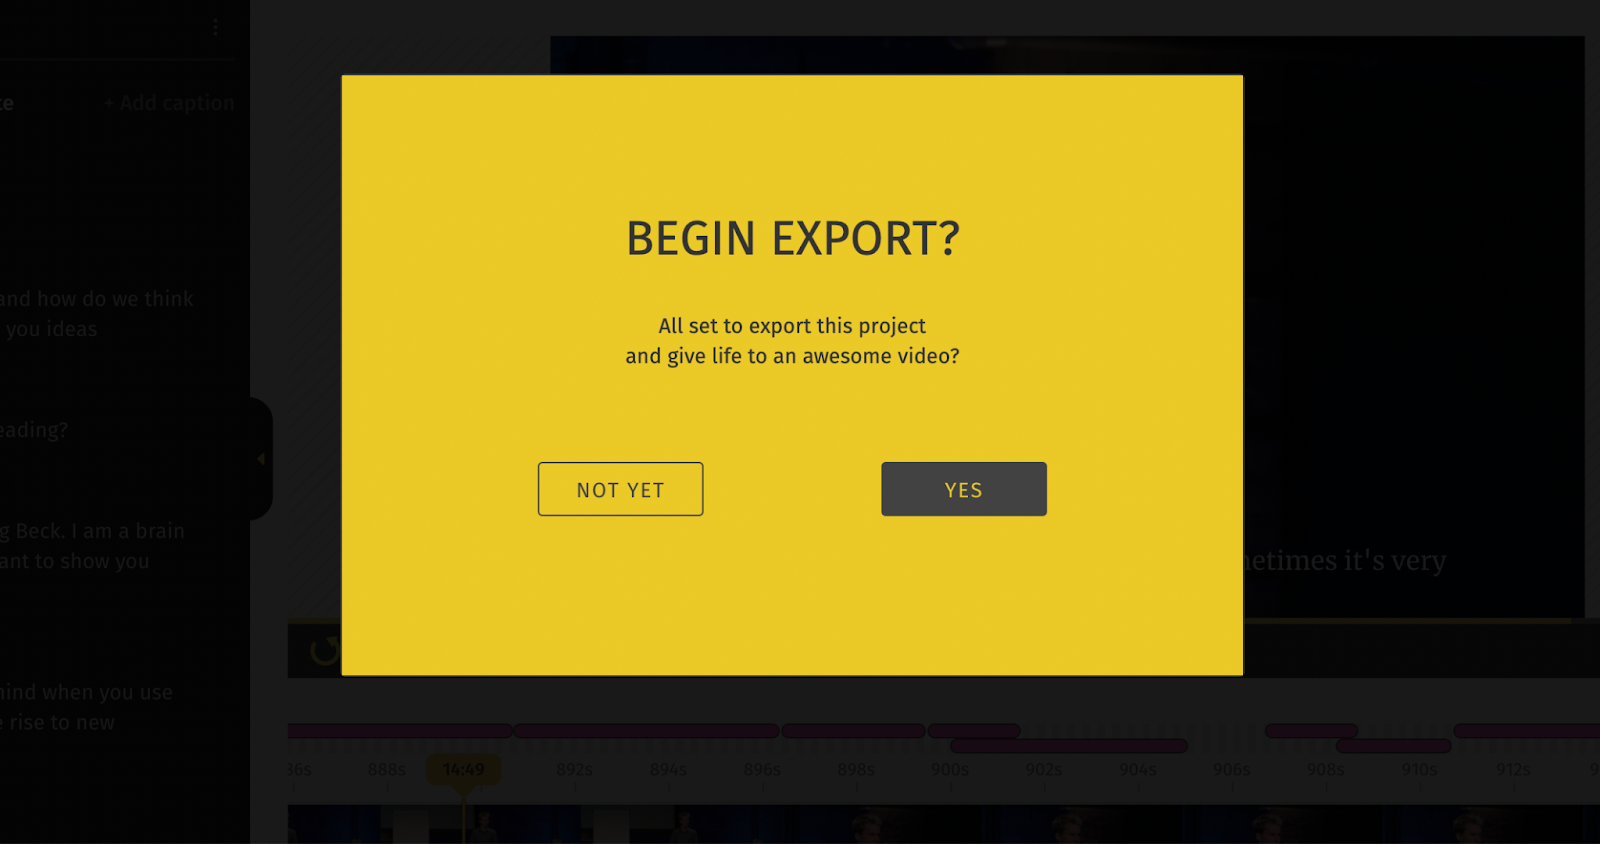 Click on 'Yes' to begin the export process.